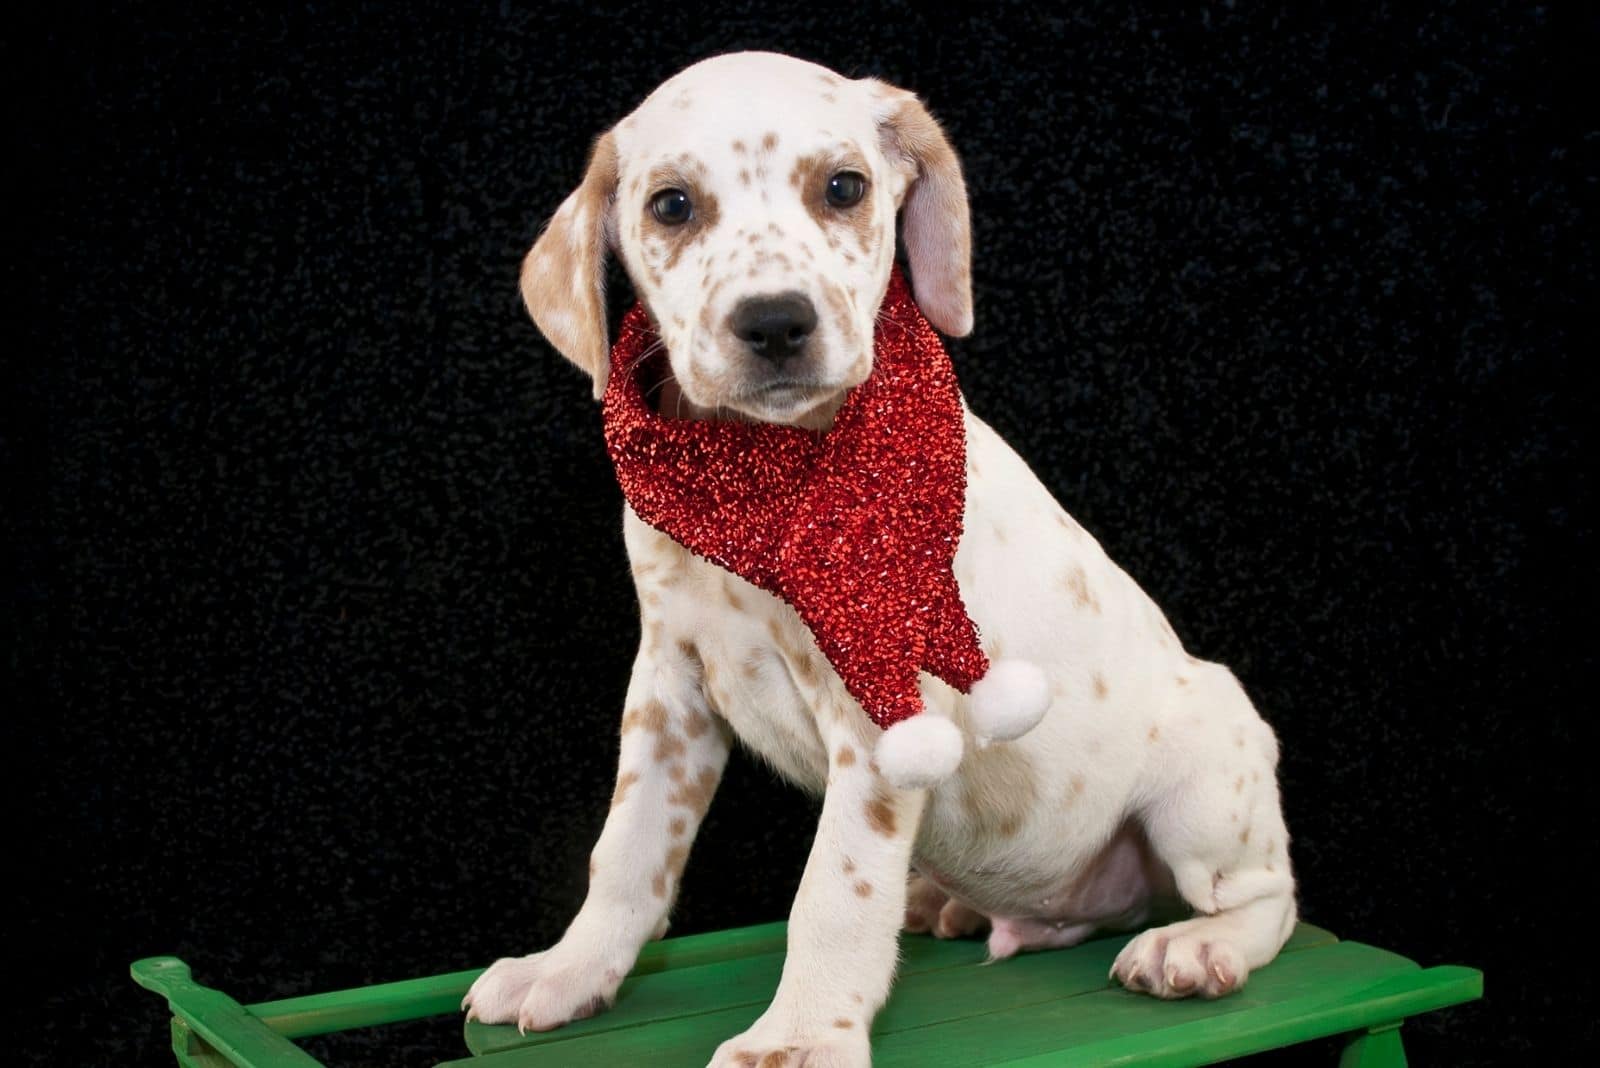 lemon dalmatian puppy with christmas coat standing in green table